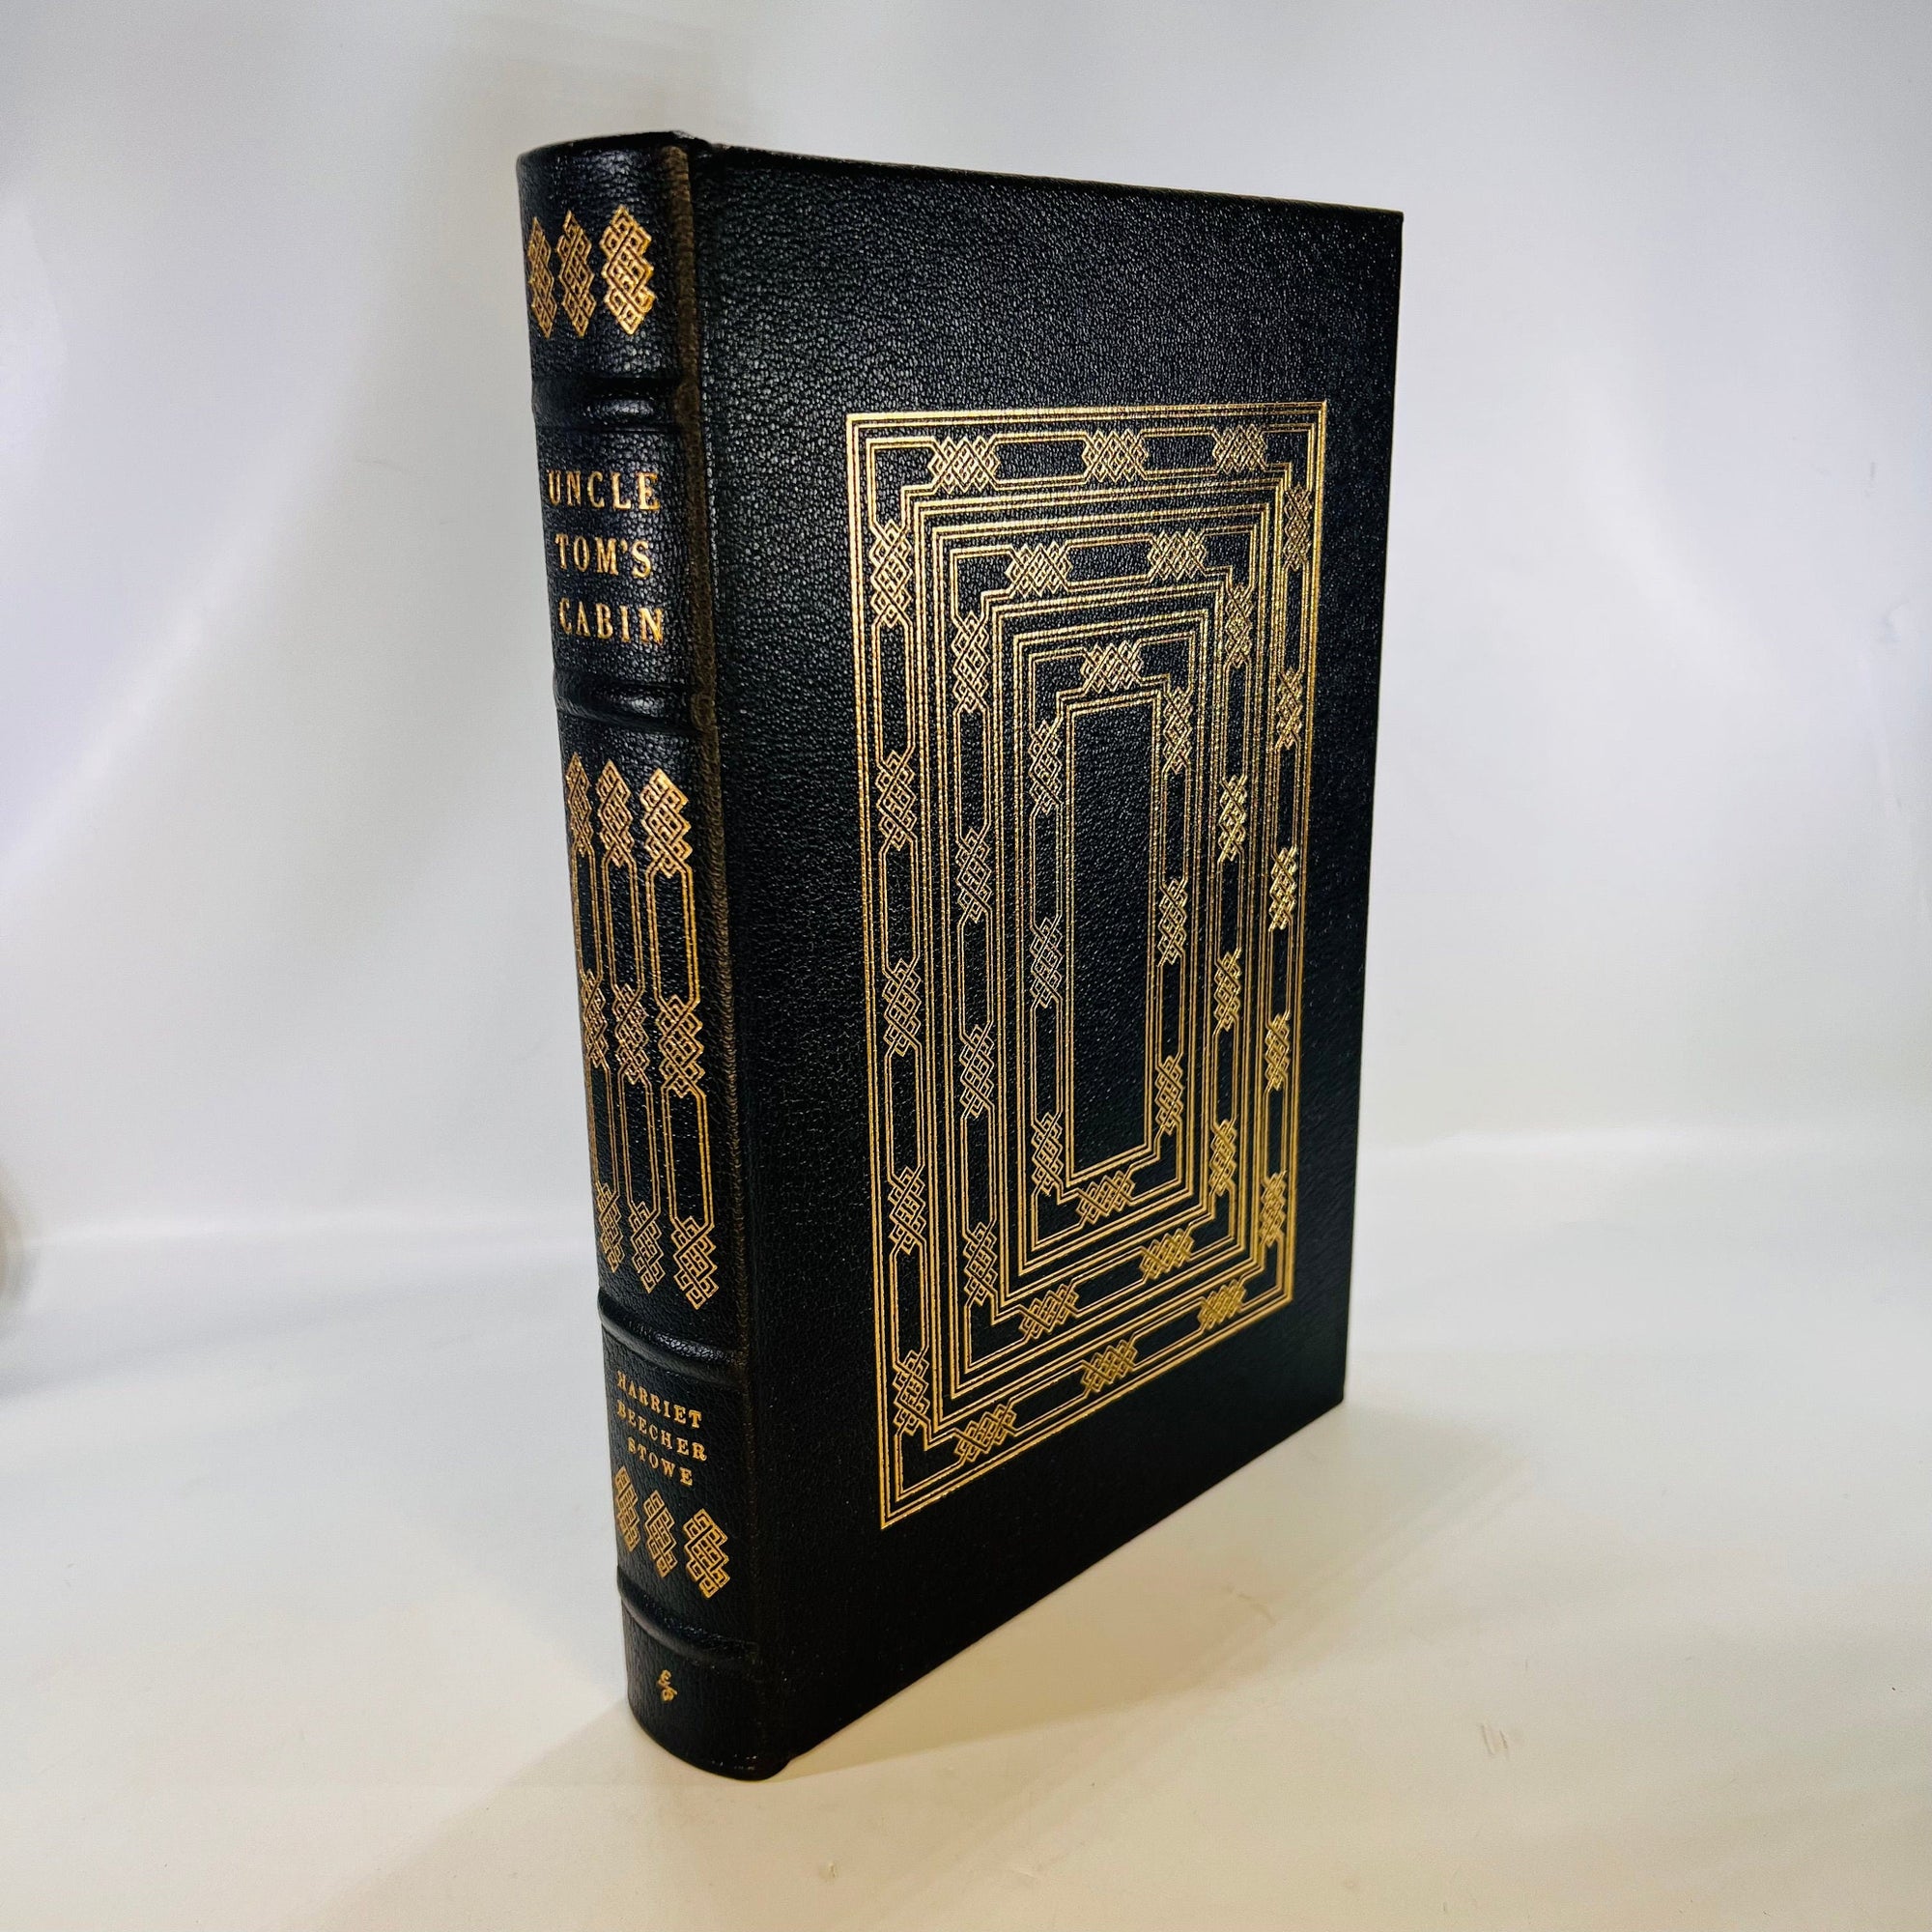 Uncle Tom's Cabin or Life Among the Lonly by Harriet Beecher Stowe 1979 Easton Press part of the 100 Greatest Books